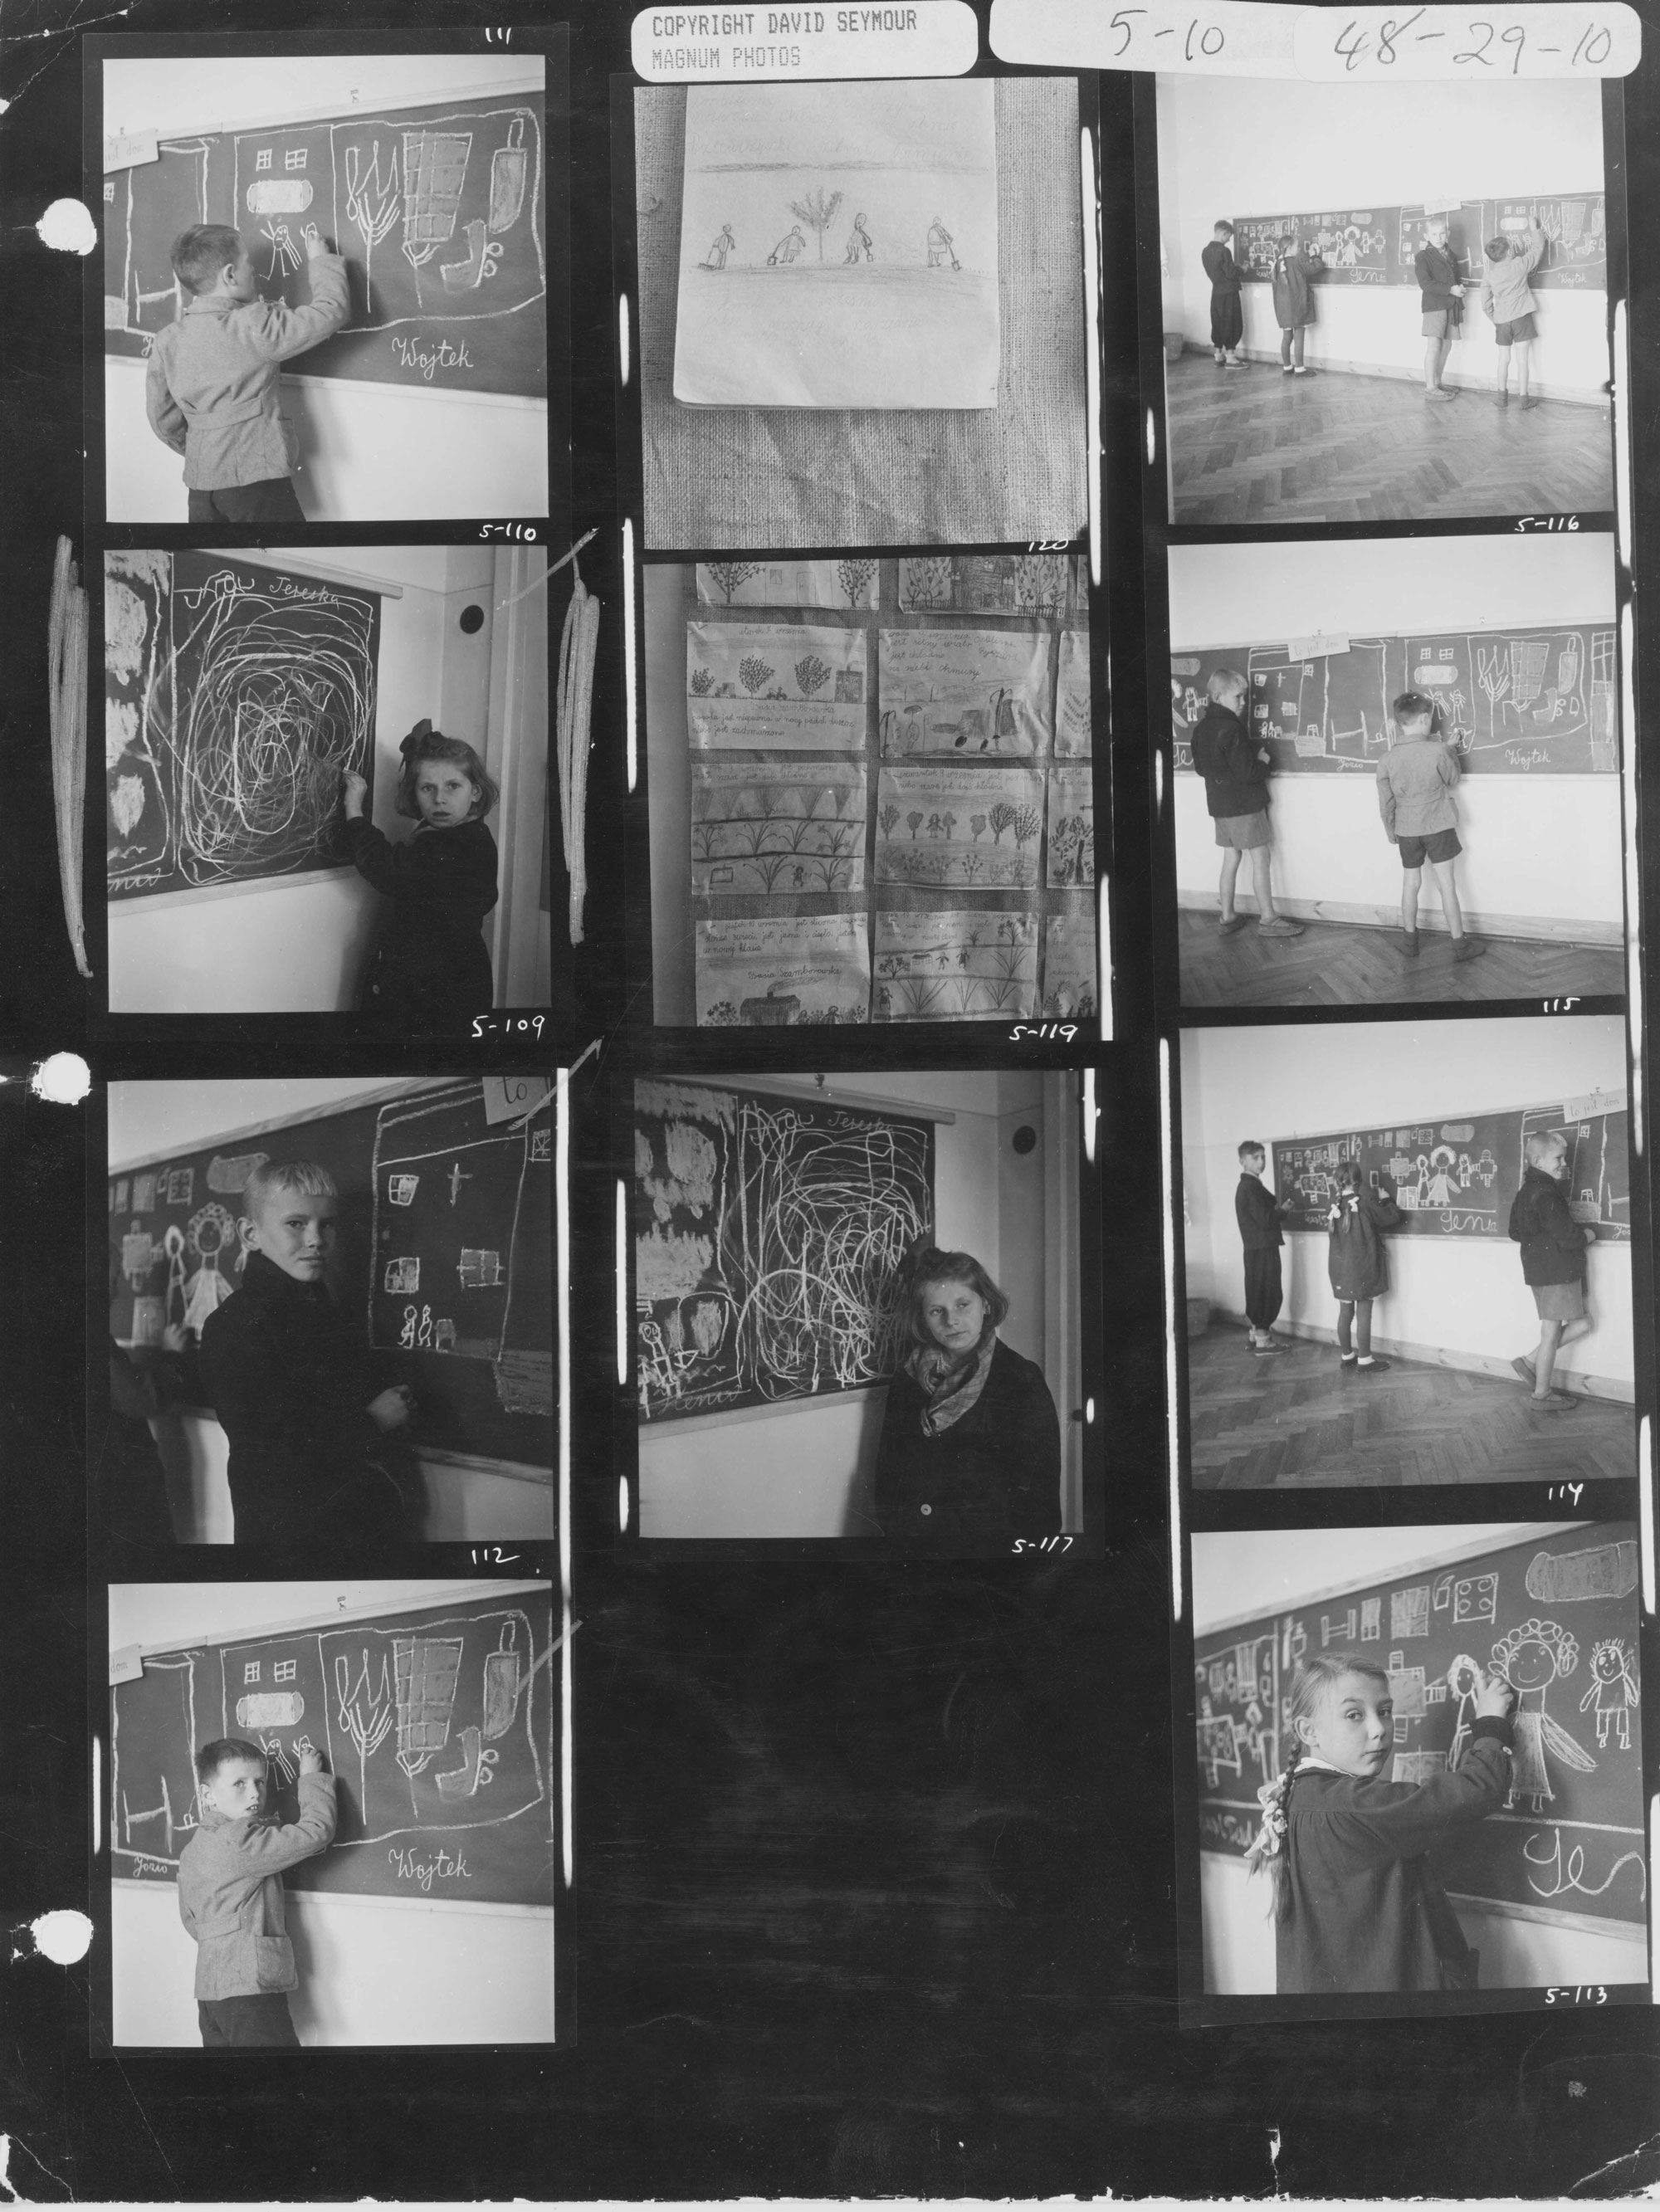 Contact sheet of the children drawing on blackboard. Special-need institute, Warsaw, 1948. (David ‘Chim' Seymour—Magnum Photos)